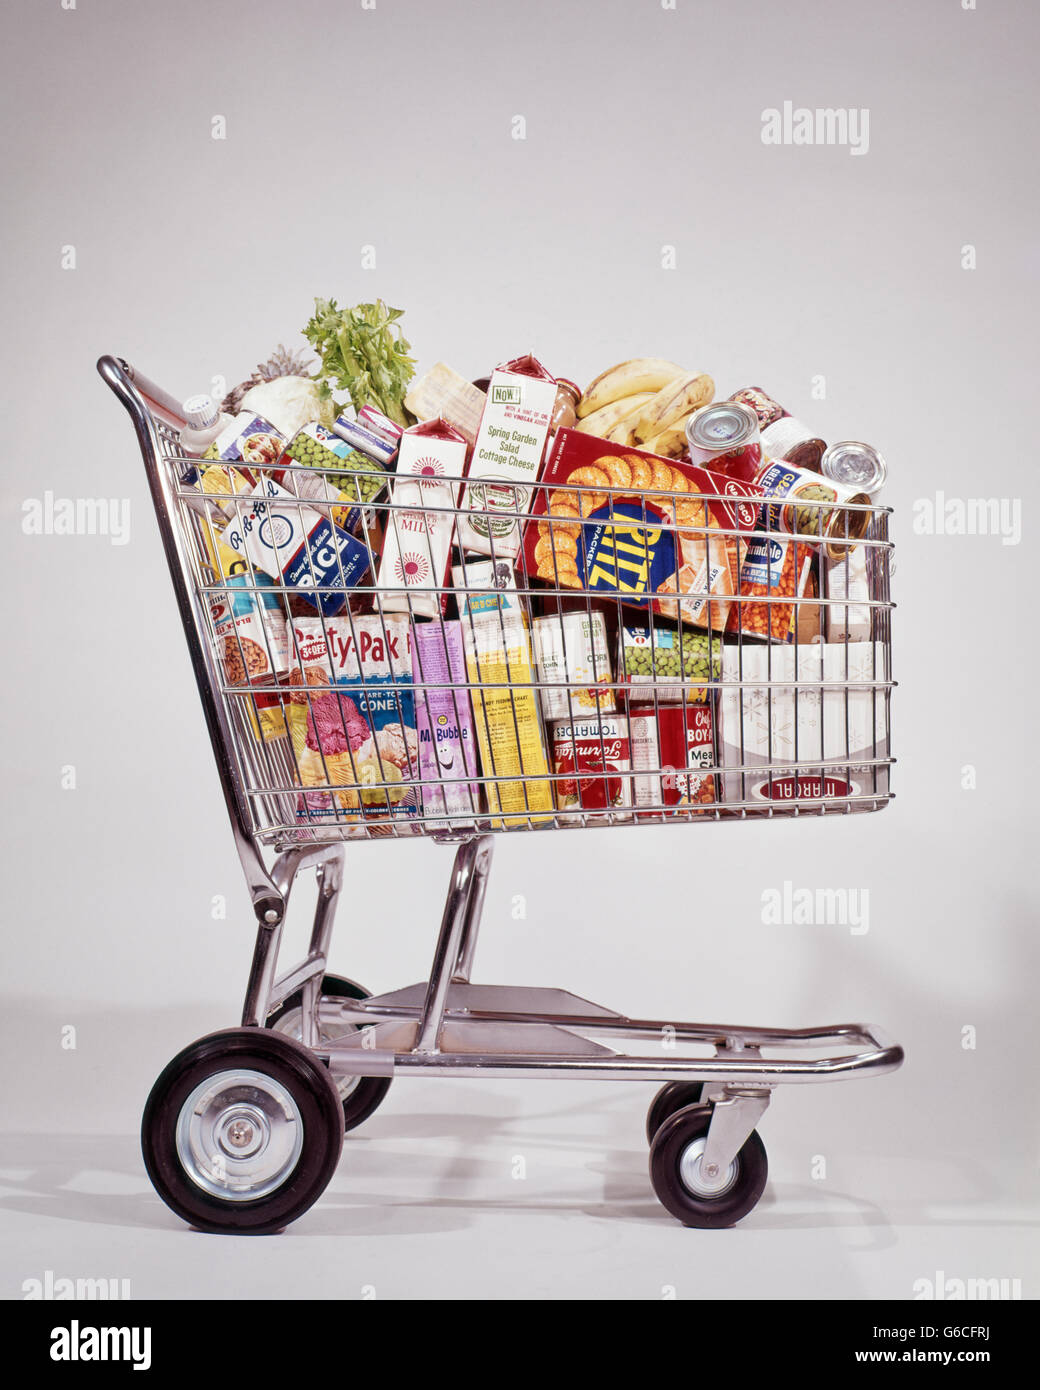 1960s GROCERY SHOPPING CART FULL OF GROCERIES Stock Photo - Alamy